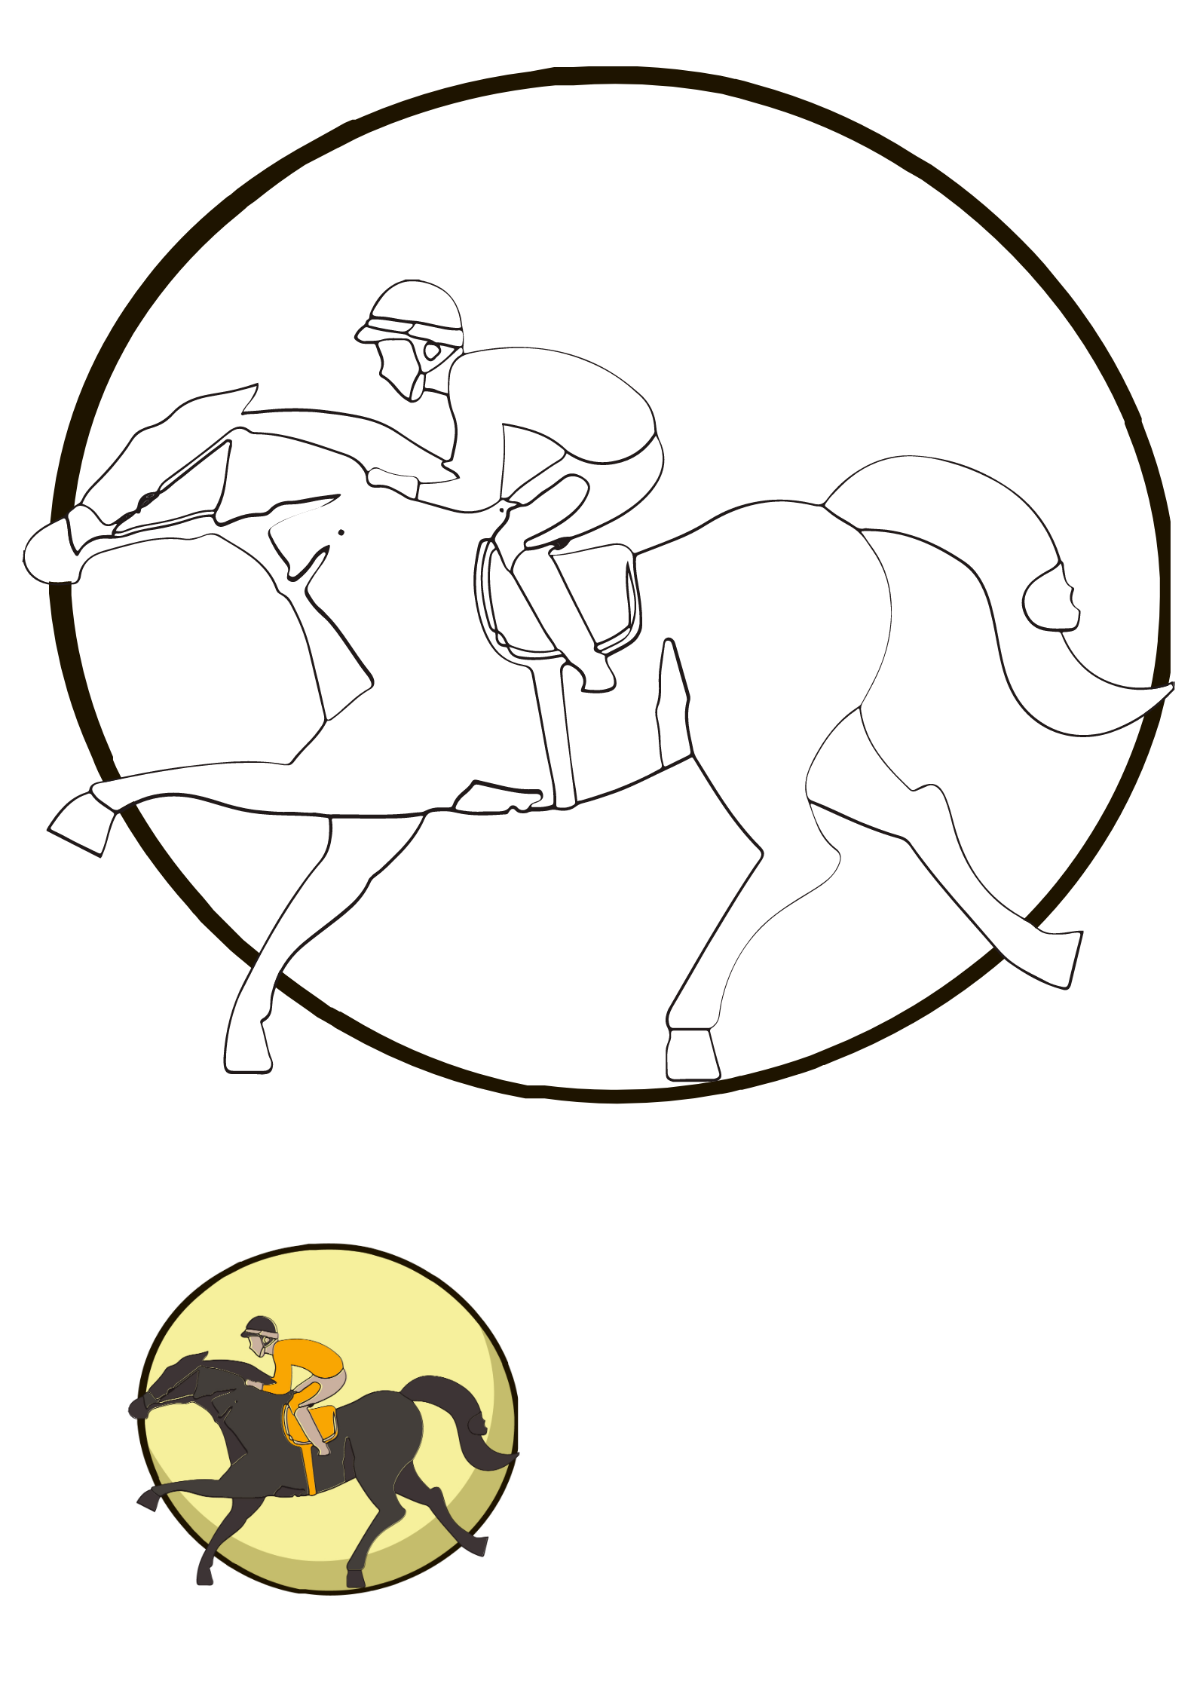 Free Horse Riding Coloring Page Template